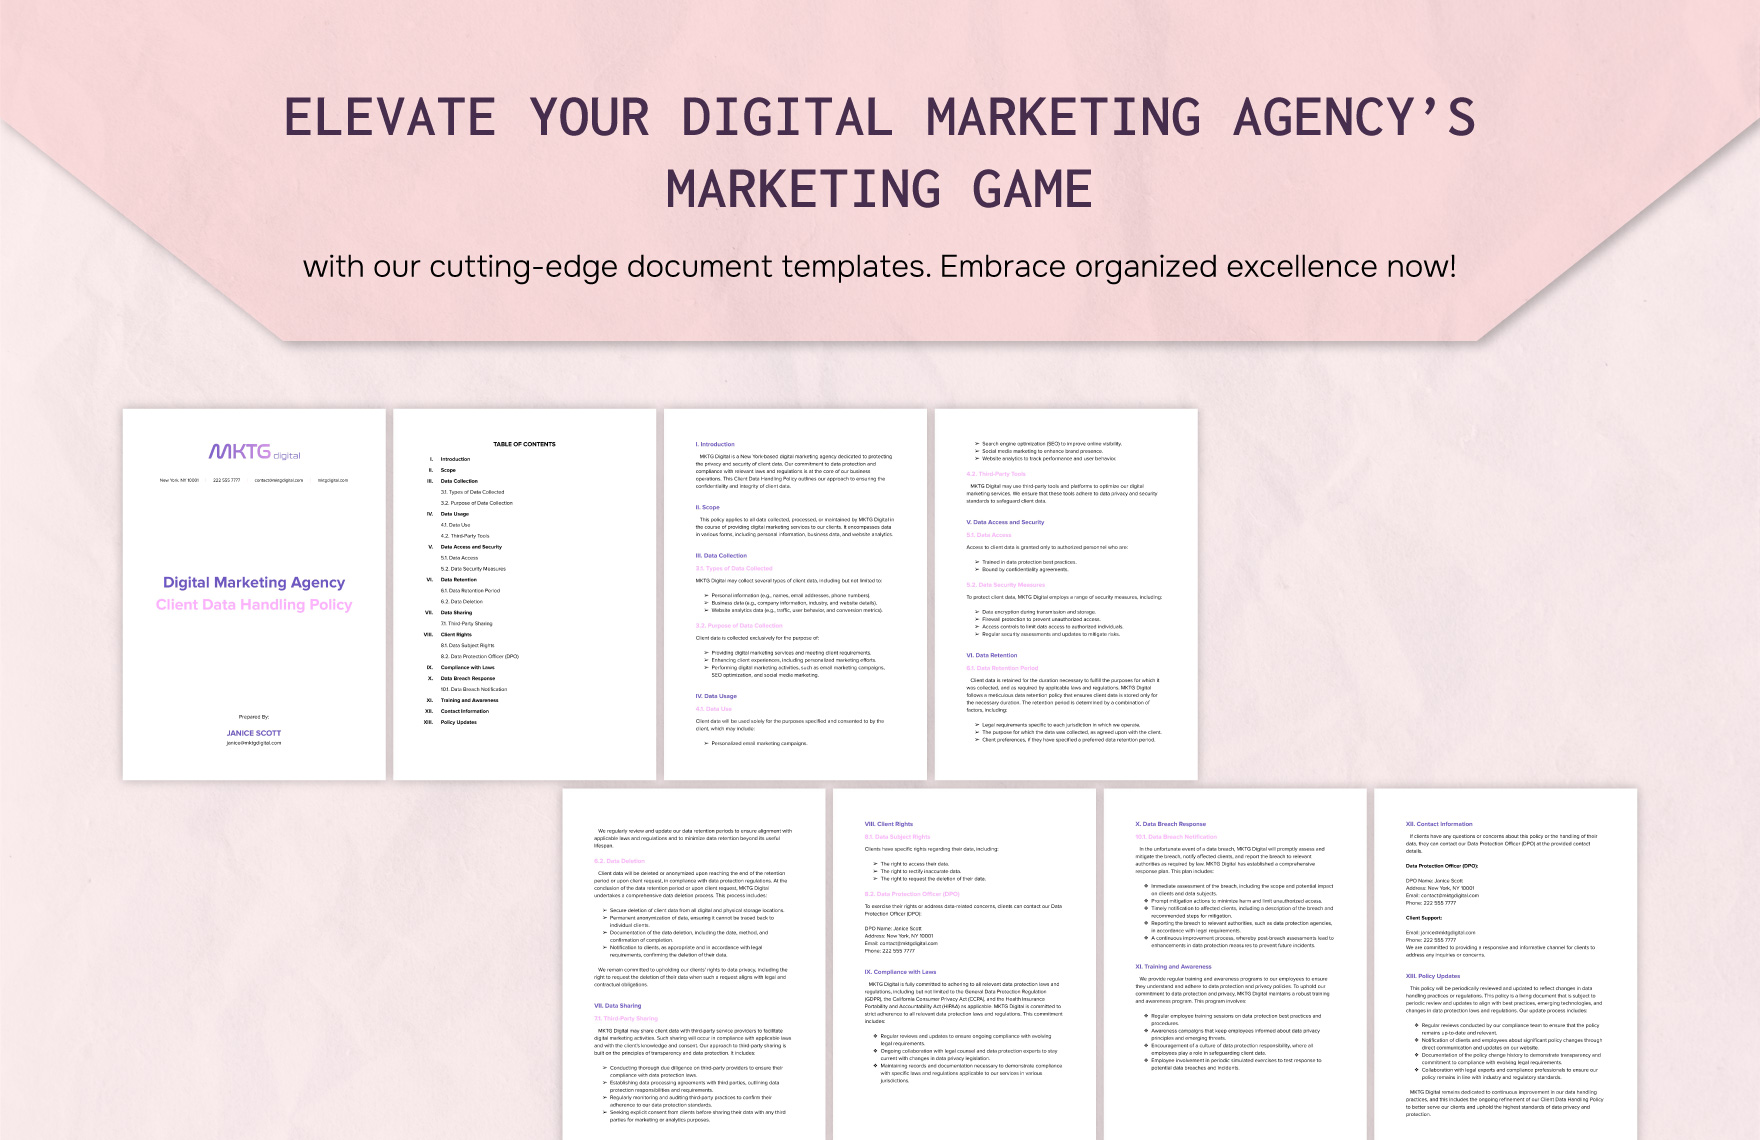 Digital Marketing Agency Client Data Handling Policy Template